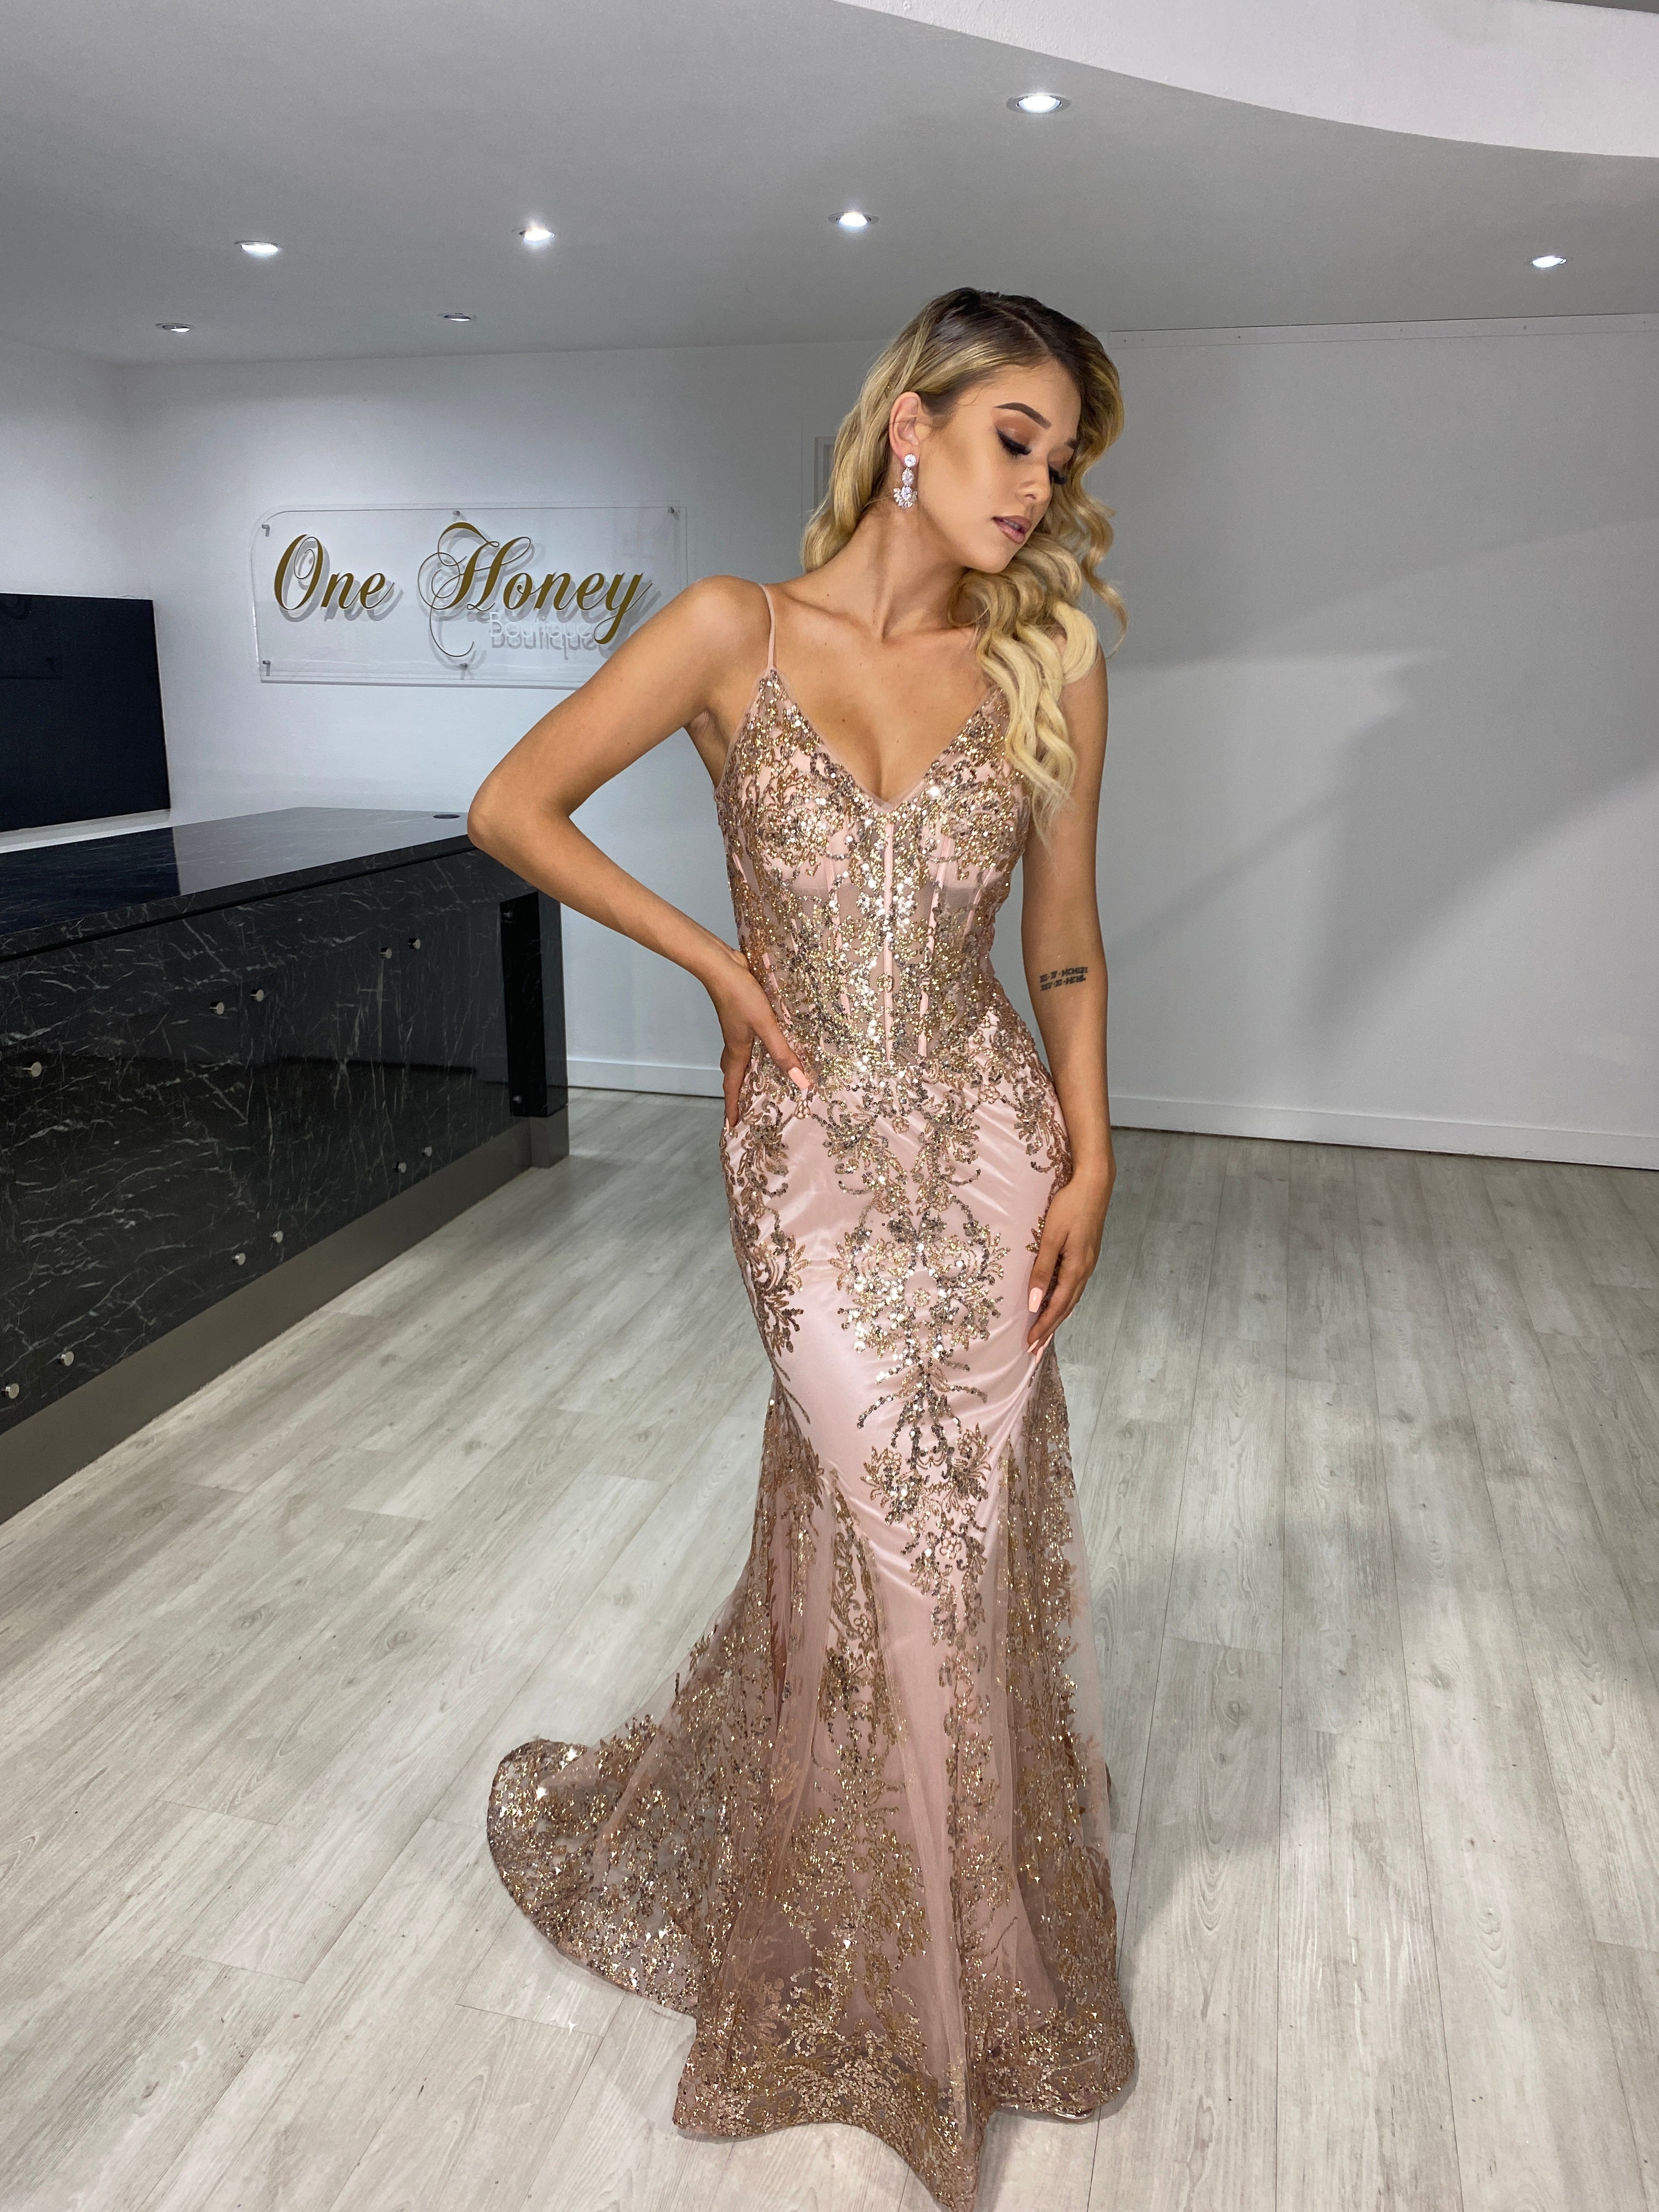 Sparkling Gold Glitter Sequin Mermaid Gold Sequin Prom Dress For Black  Girls 2022 Formal Evening Gown With Long Sleeves, Train, And Plus Size  Option From Bridalstore, $146.08 | DHgate.Com